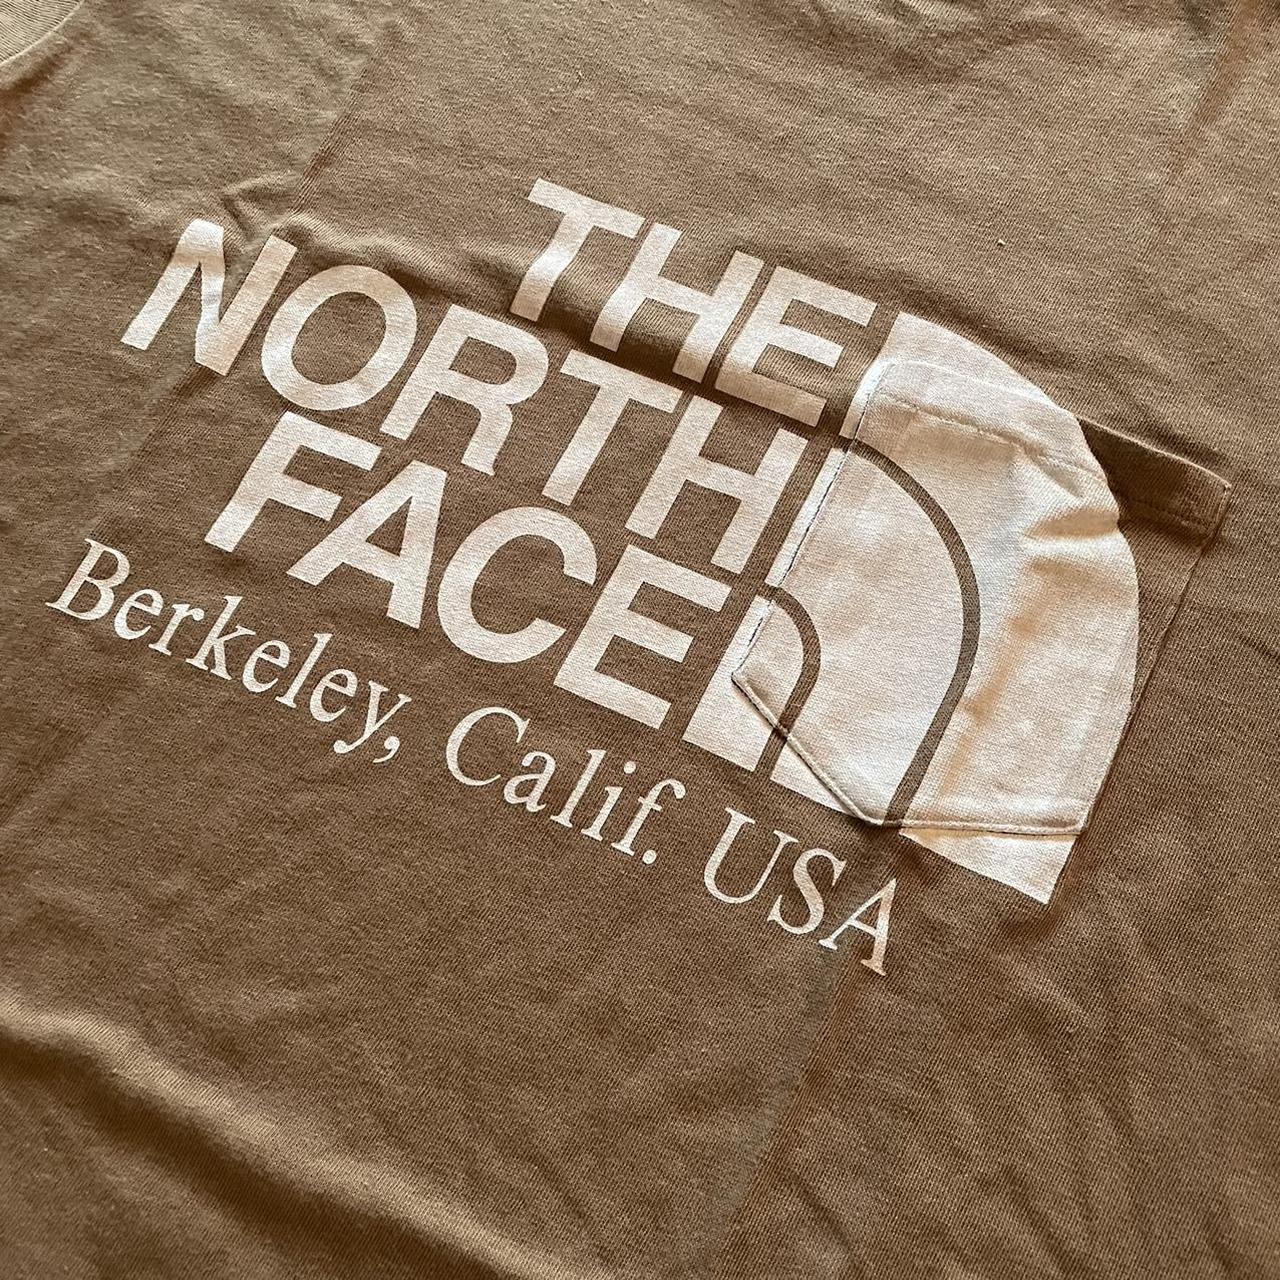 The North Face Purple Label Men's Tan and Brown T-shirt (2)